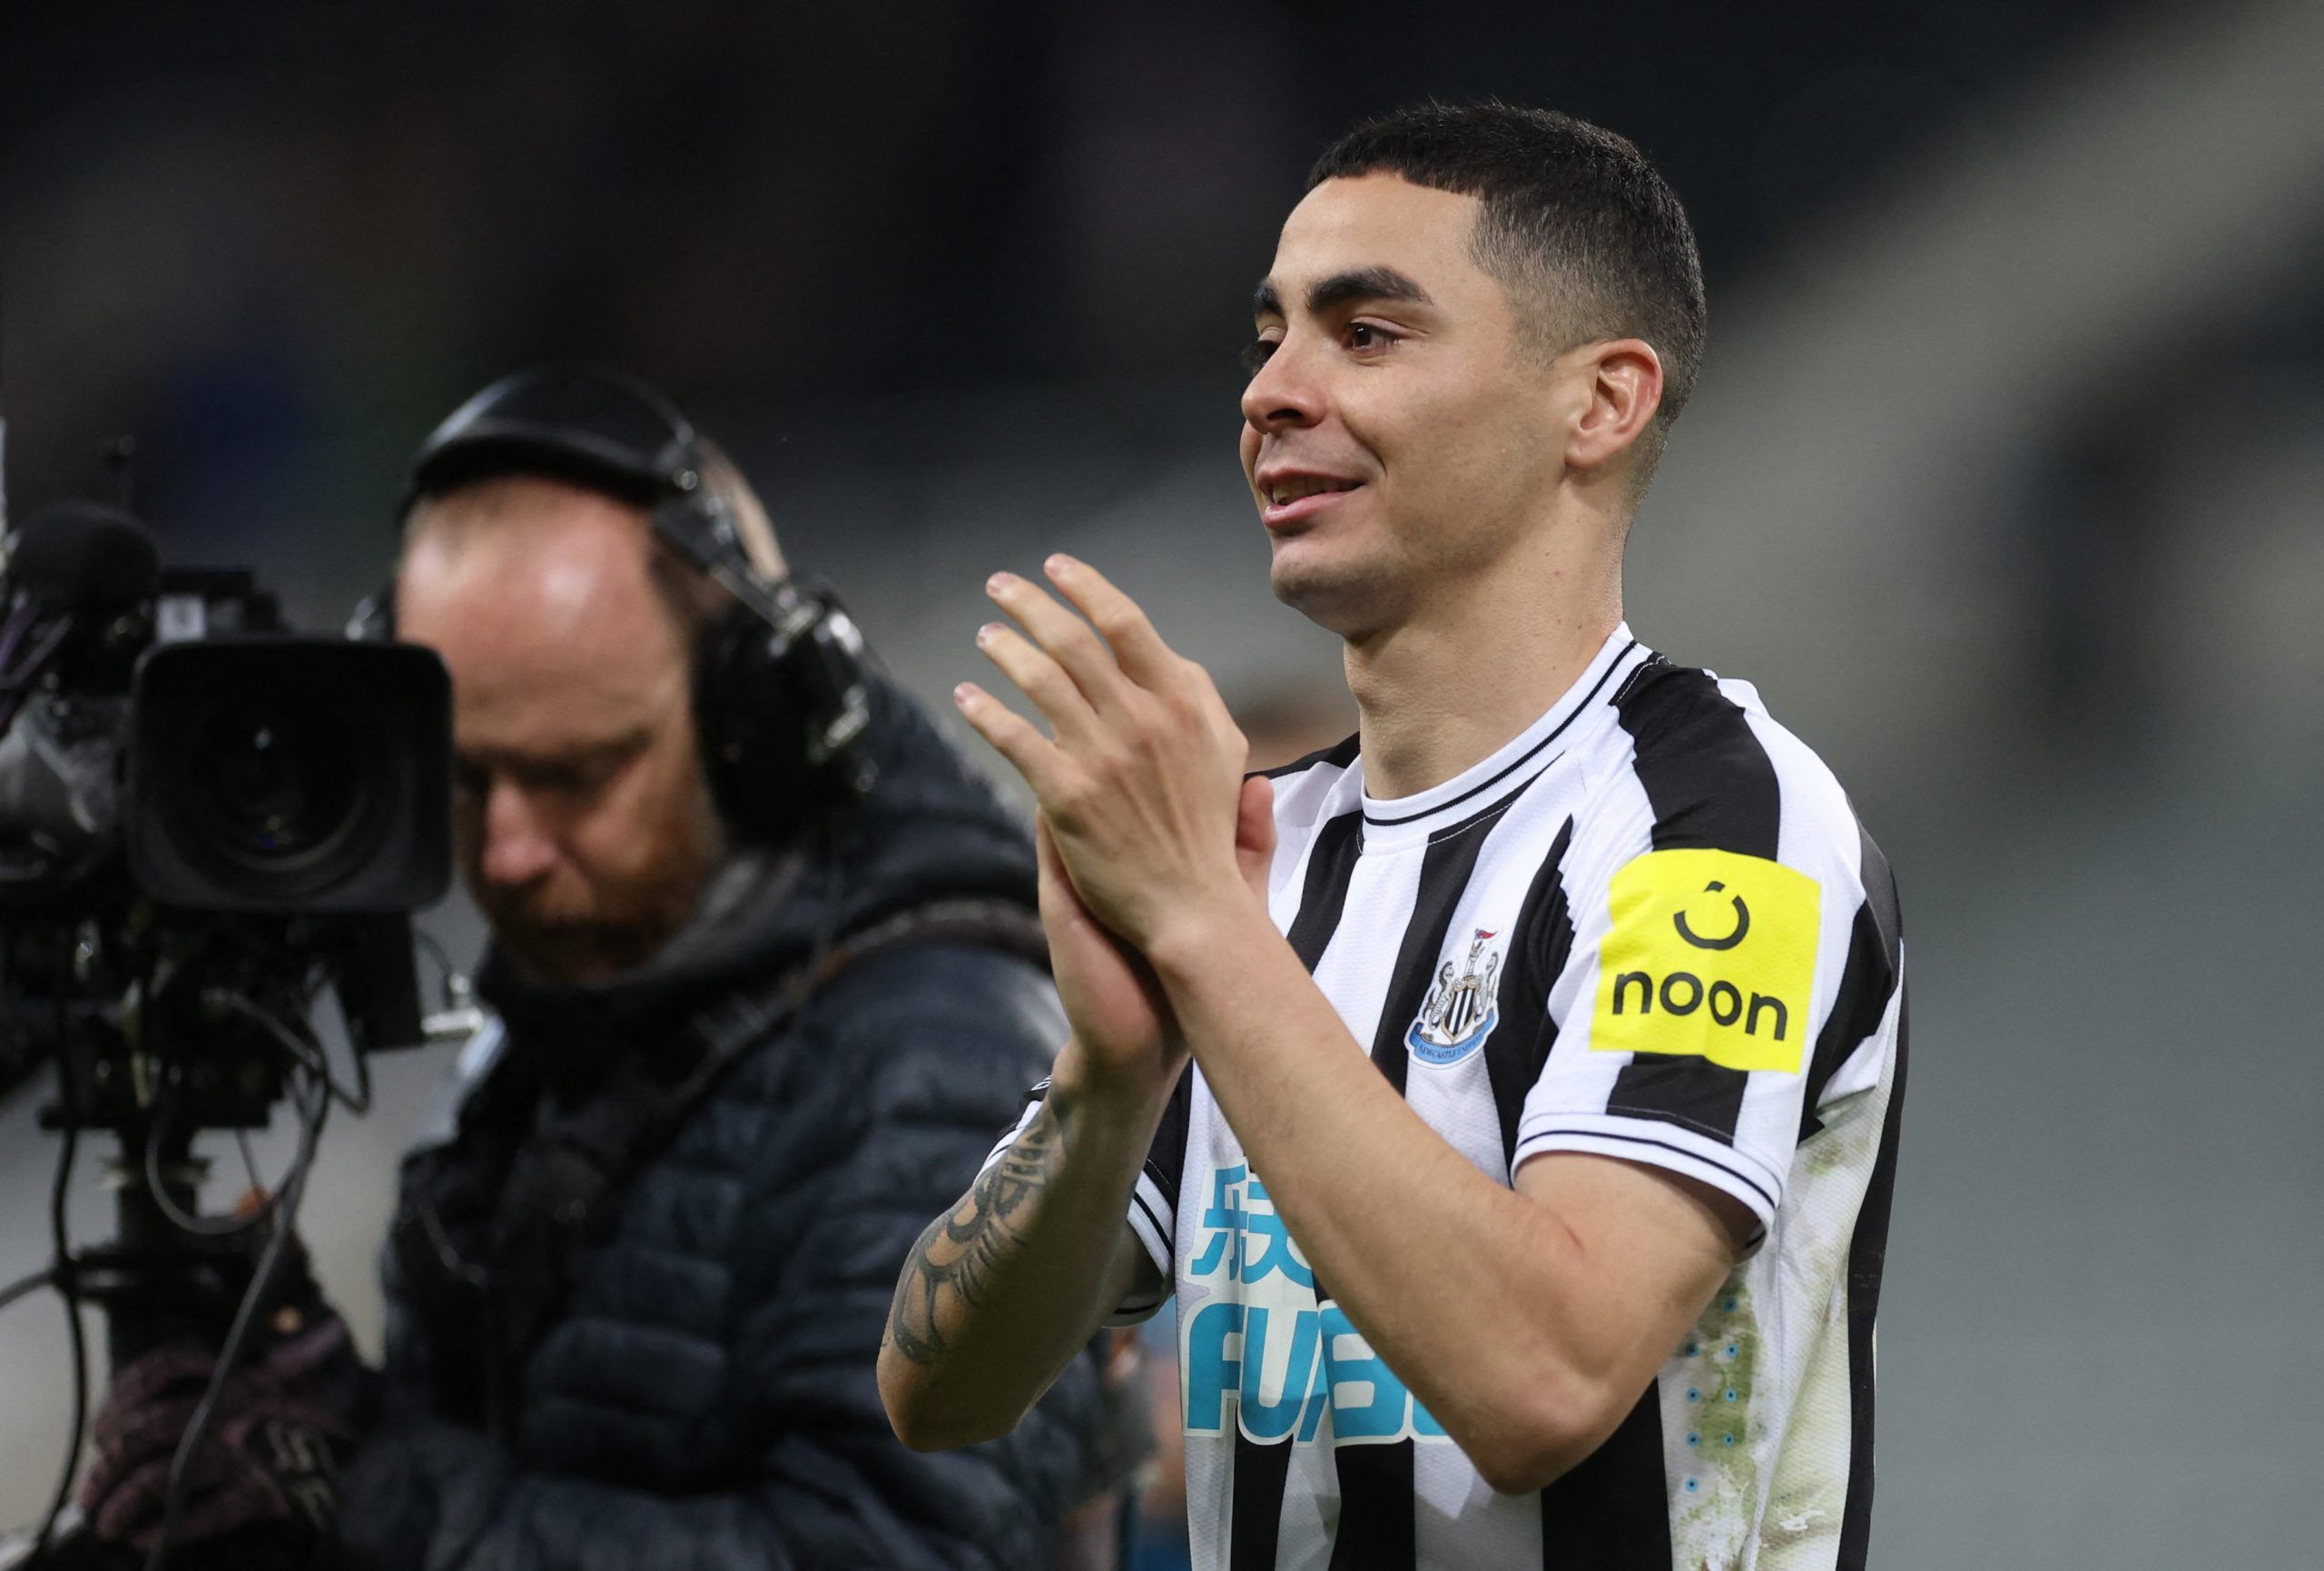 Soccer Football - Premier League - Newcastle United v Everton - St James' Park, Newcastle, Britain - October 19, 2022 Newcastle United's Miguel Almiron celebrates after the match Action Images via Reuters/Lee Smith EDITORIAL USE ONLY. No use with unauthorized audio, video, data, fixture lists, club/league logos or 'live' services. Online in-match use limited to 75 images, no video emulation. No use in betting, games or single club /league/player publications.  Please contact your account represe